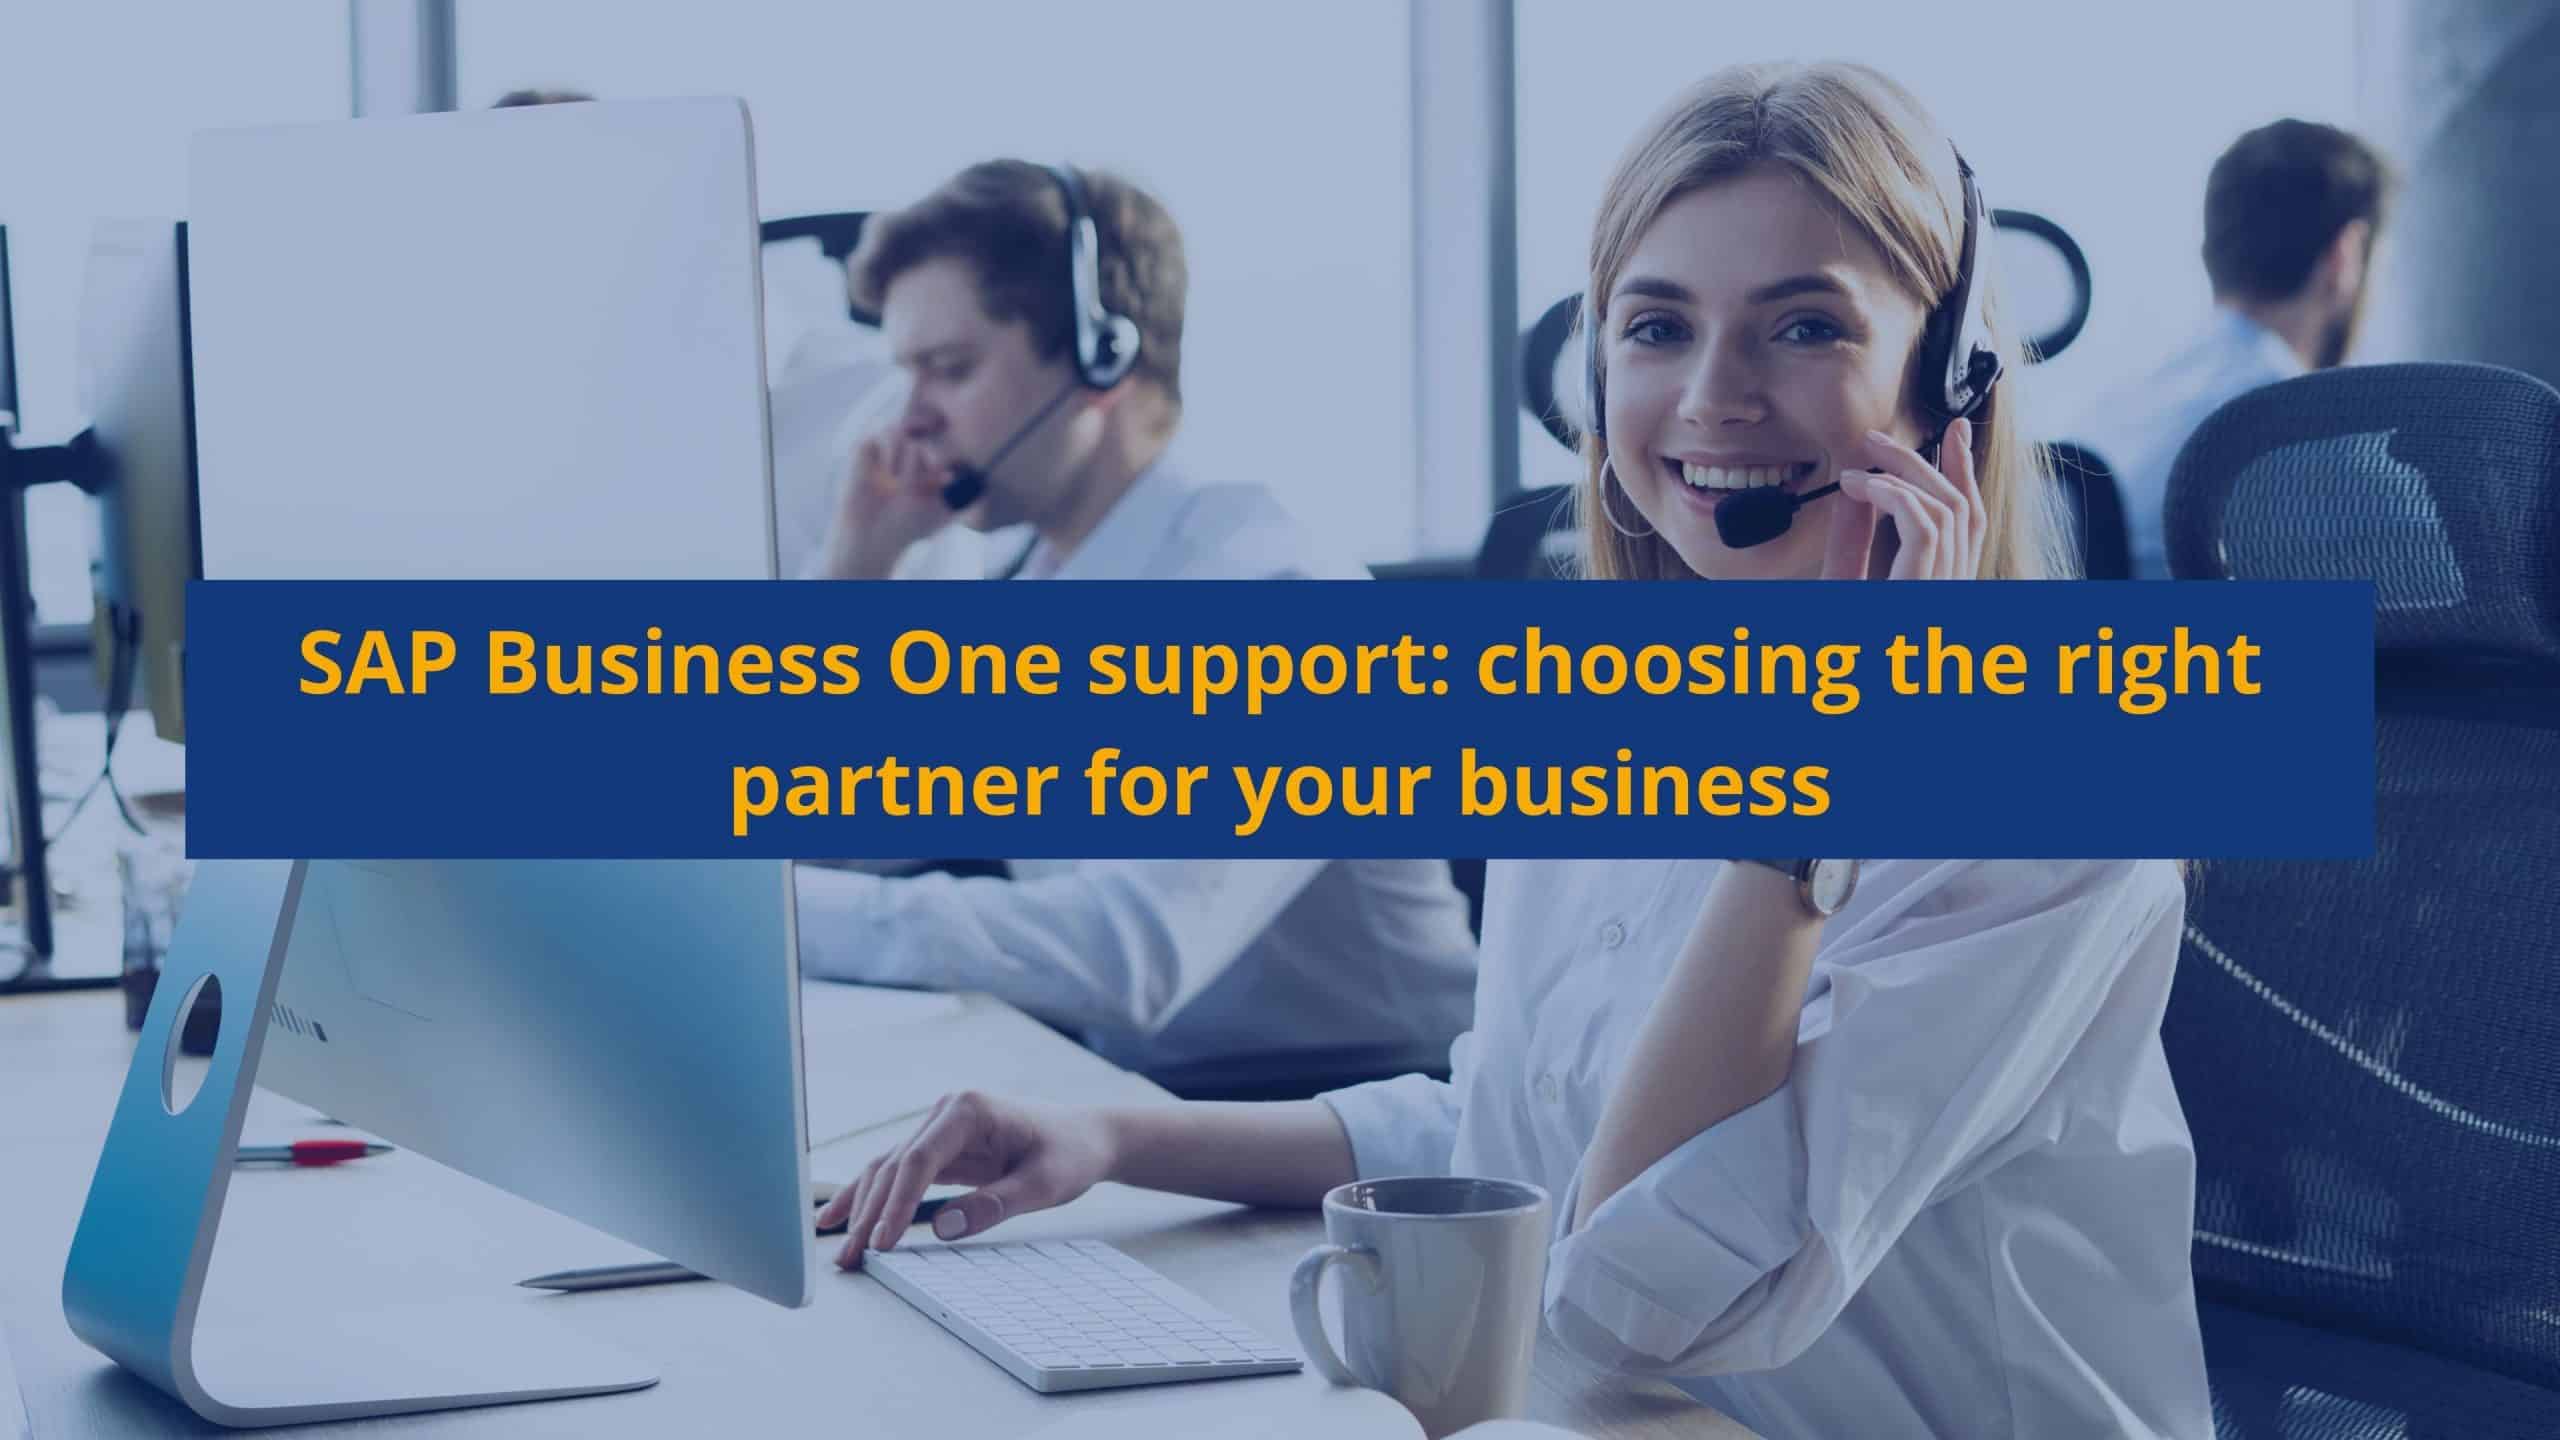 SAP Business One Support team